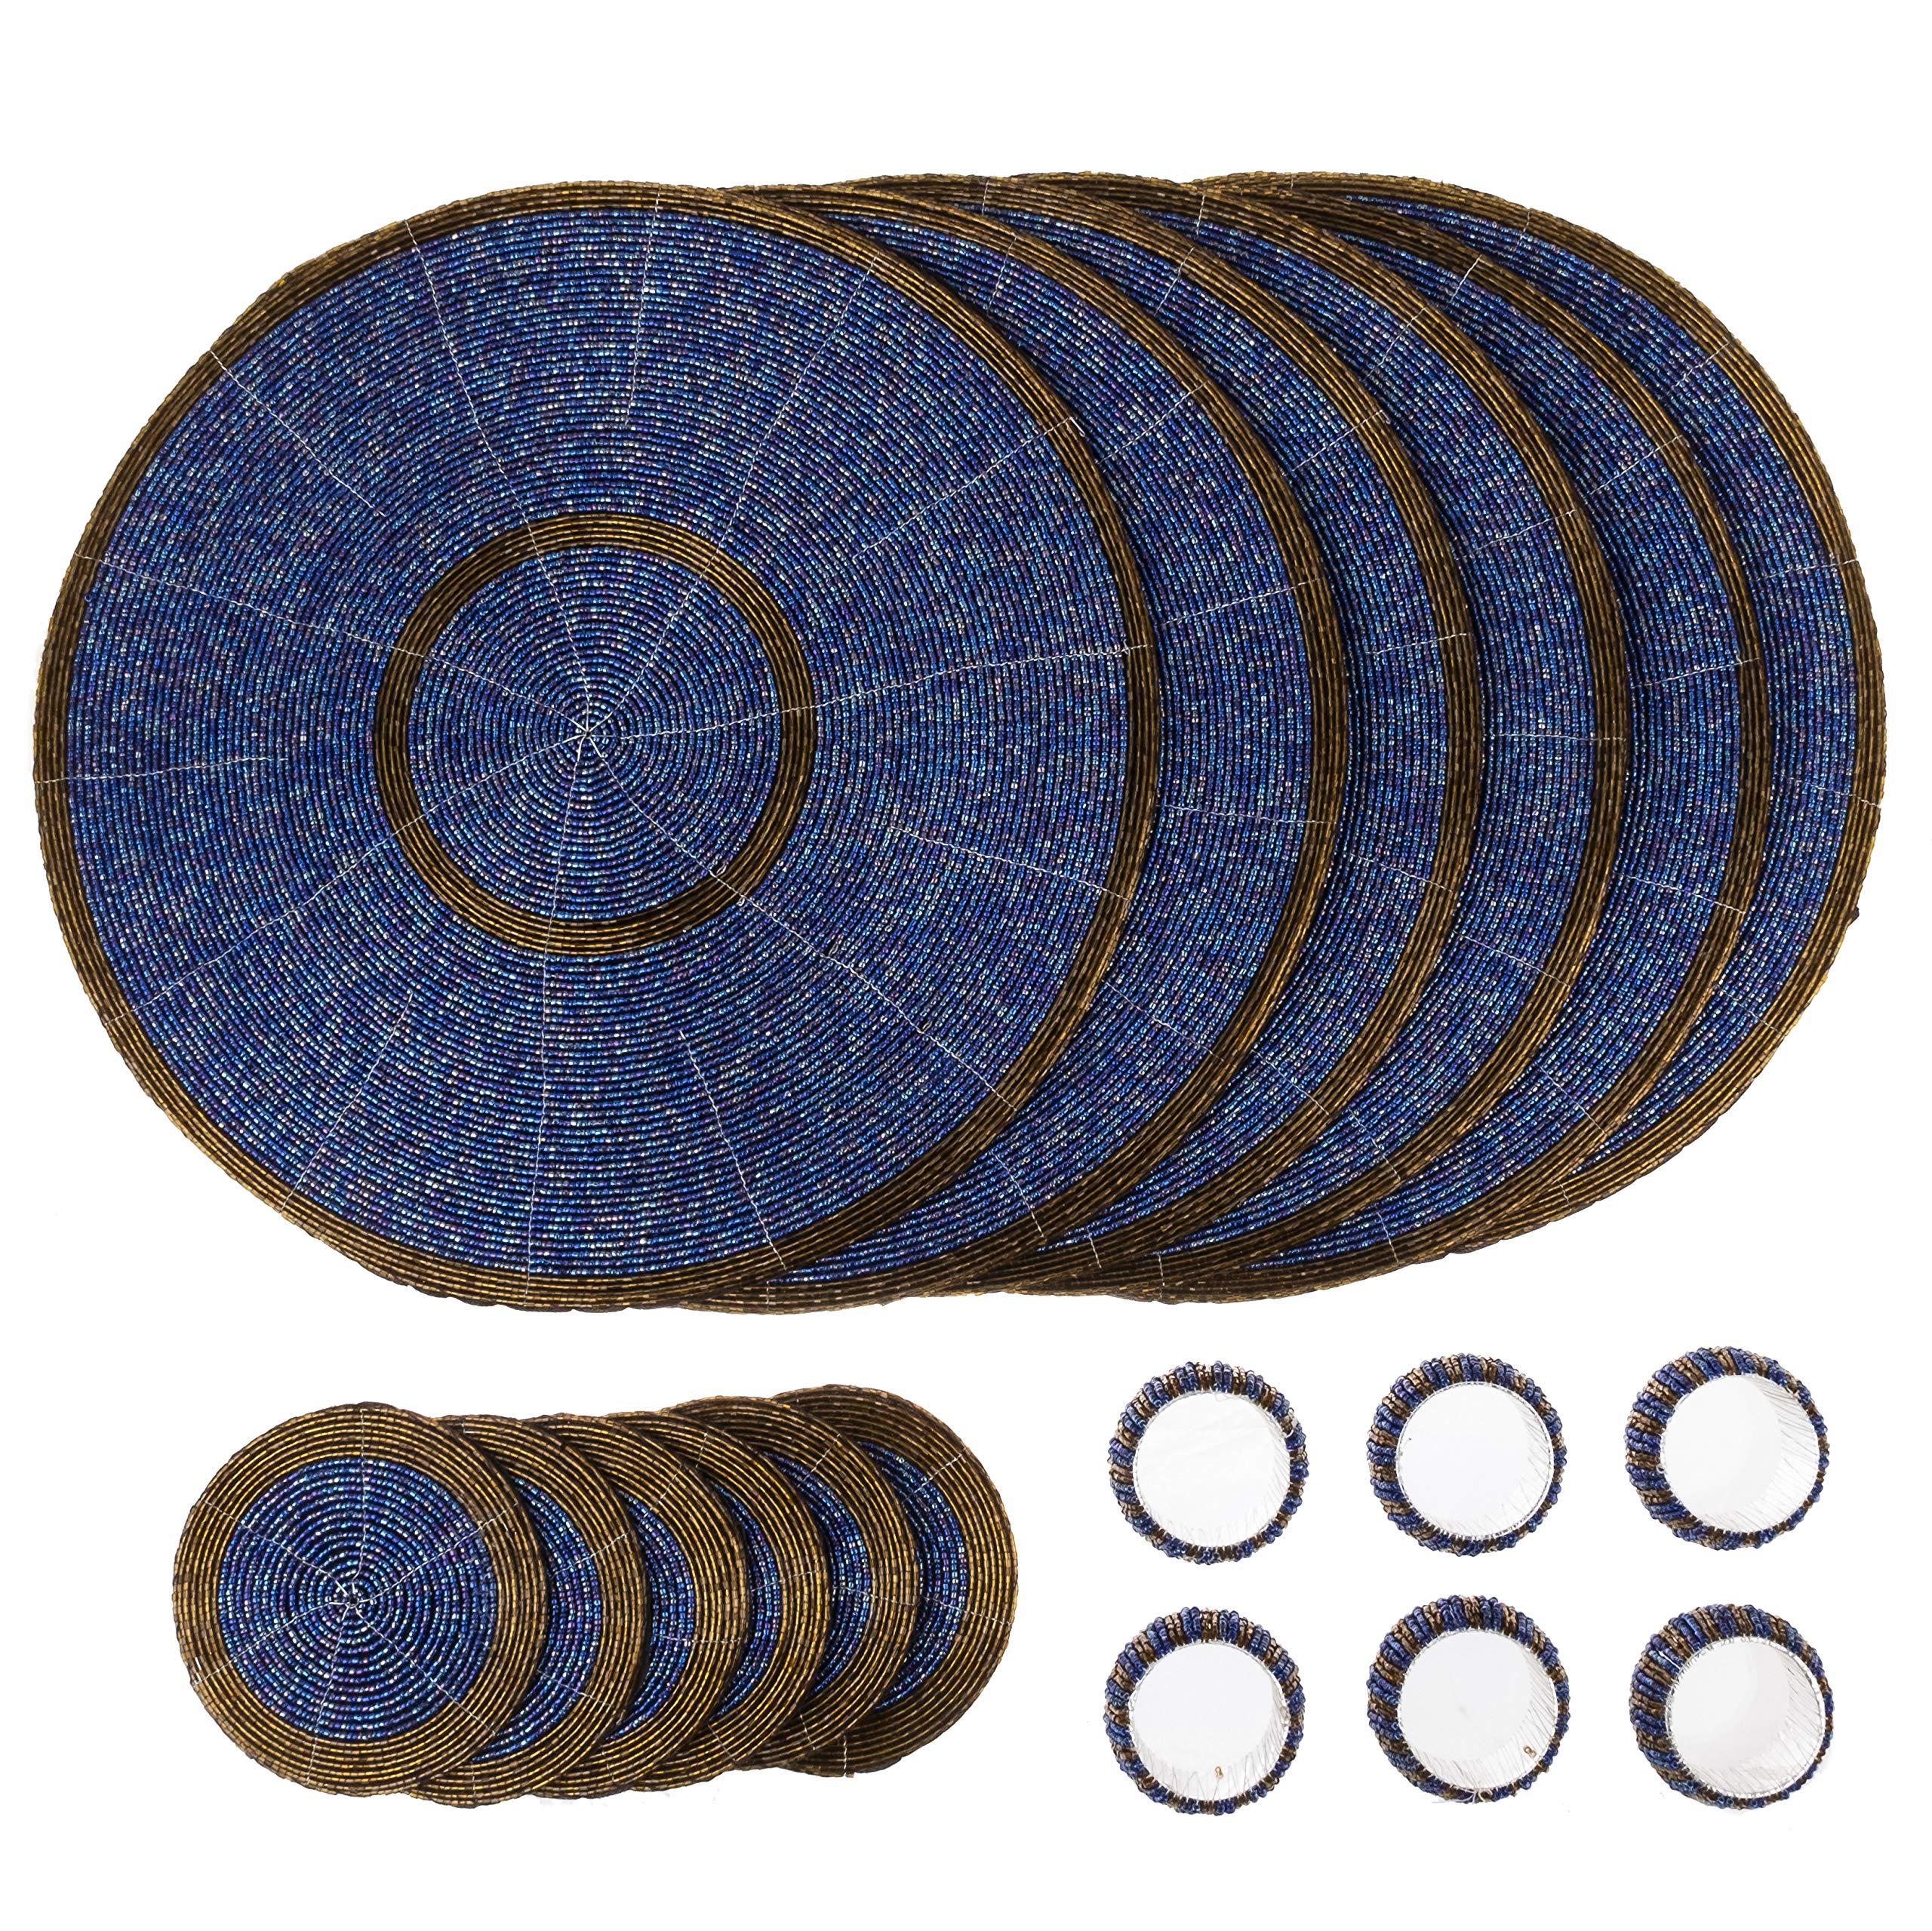 Penguin Home Handcrafted Glass Beaded Round Placemats, Coasters & Napkin Rings Set of 18 - Handmade Table Place Mats for Dining - 32 cm (13") Diameter (Blue and Antique)